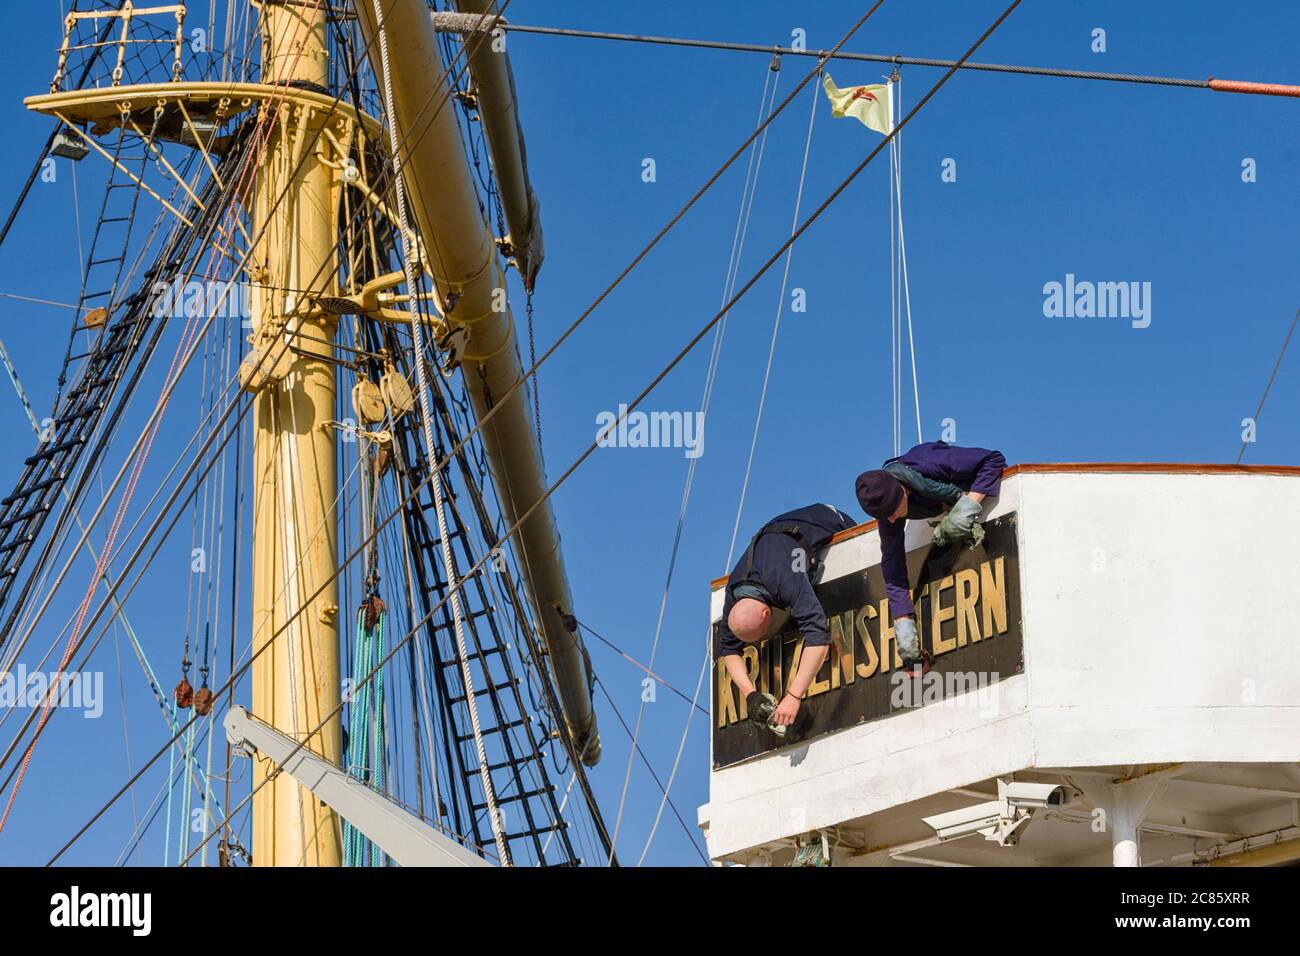 cleaning at the russian sailing ship four-masted barque Kruzenshtern in Dunkirk, France Stock Photo